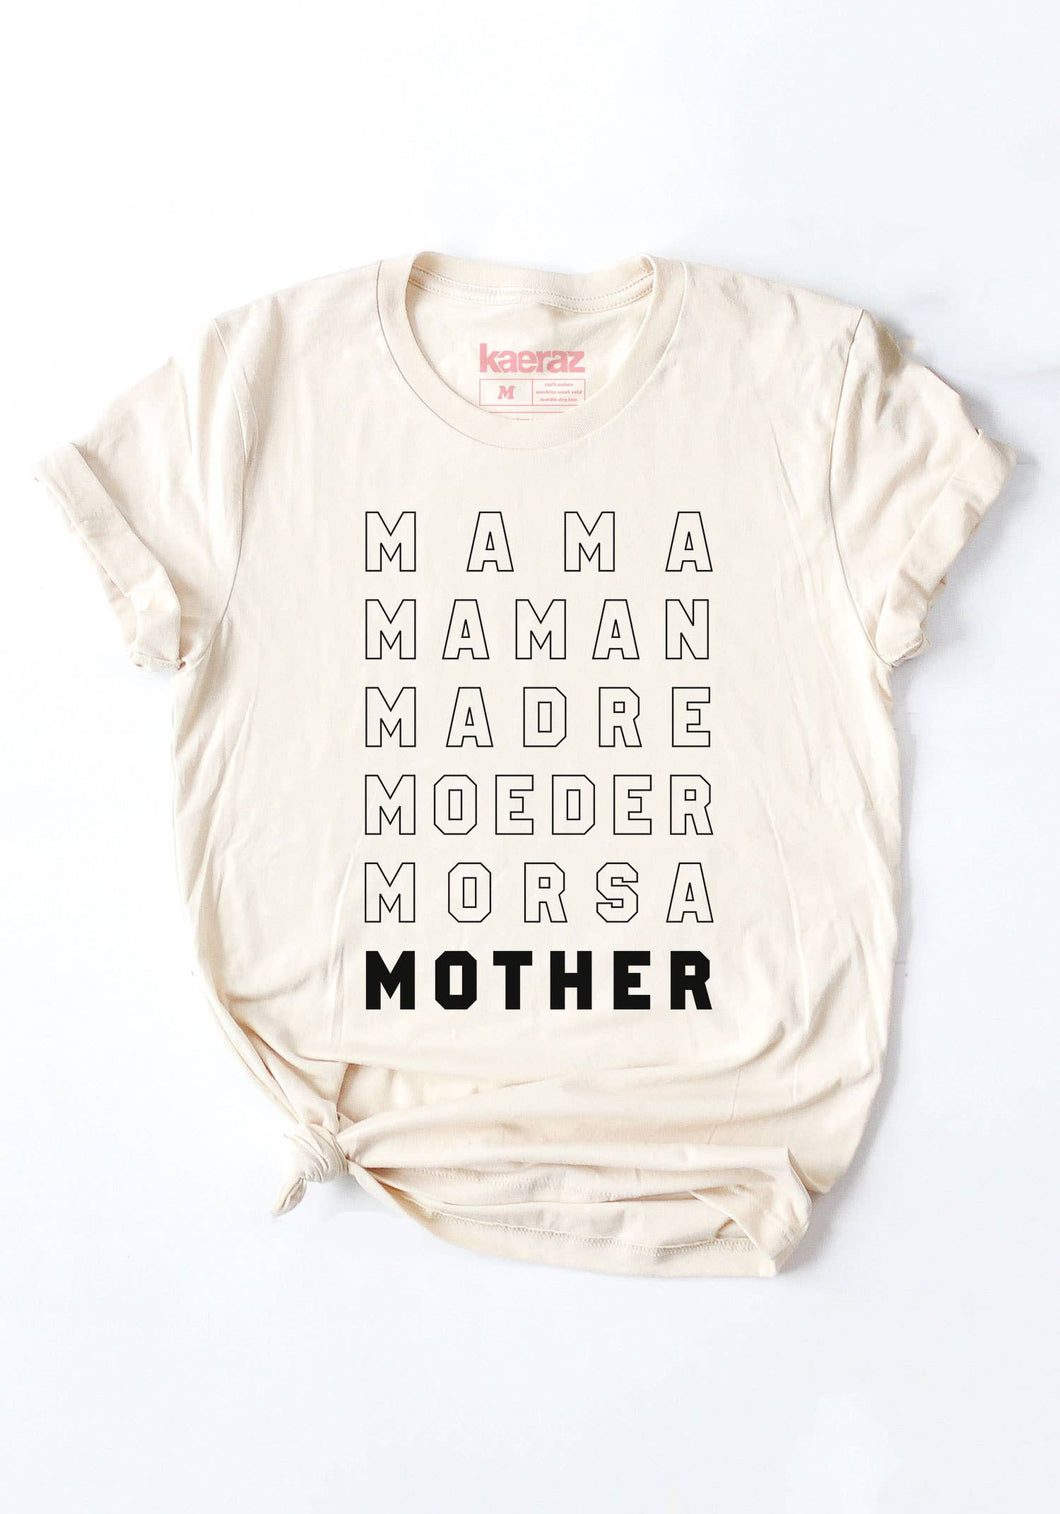 Sale! Mother Tongue Tee